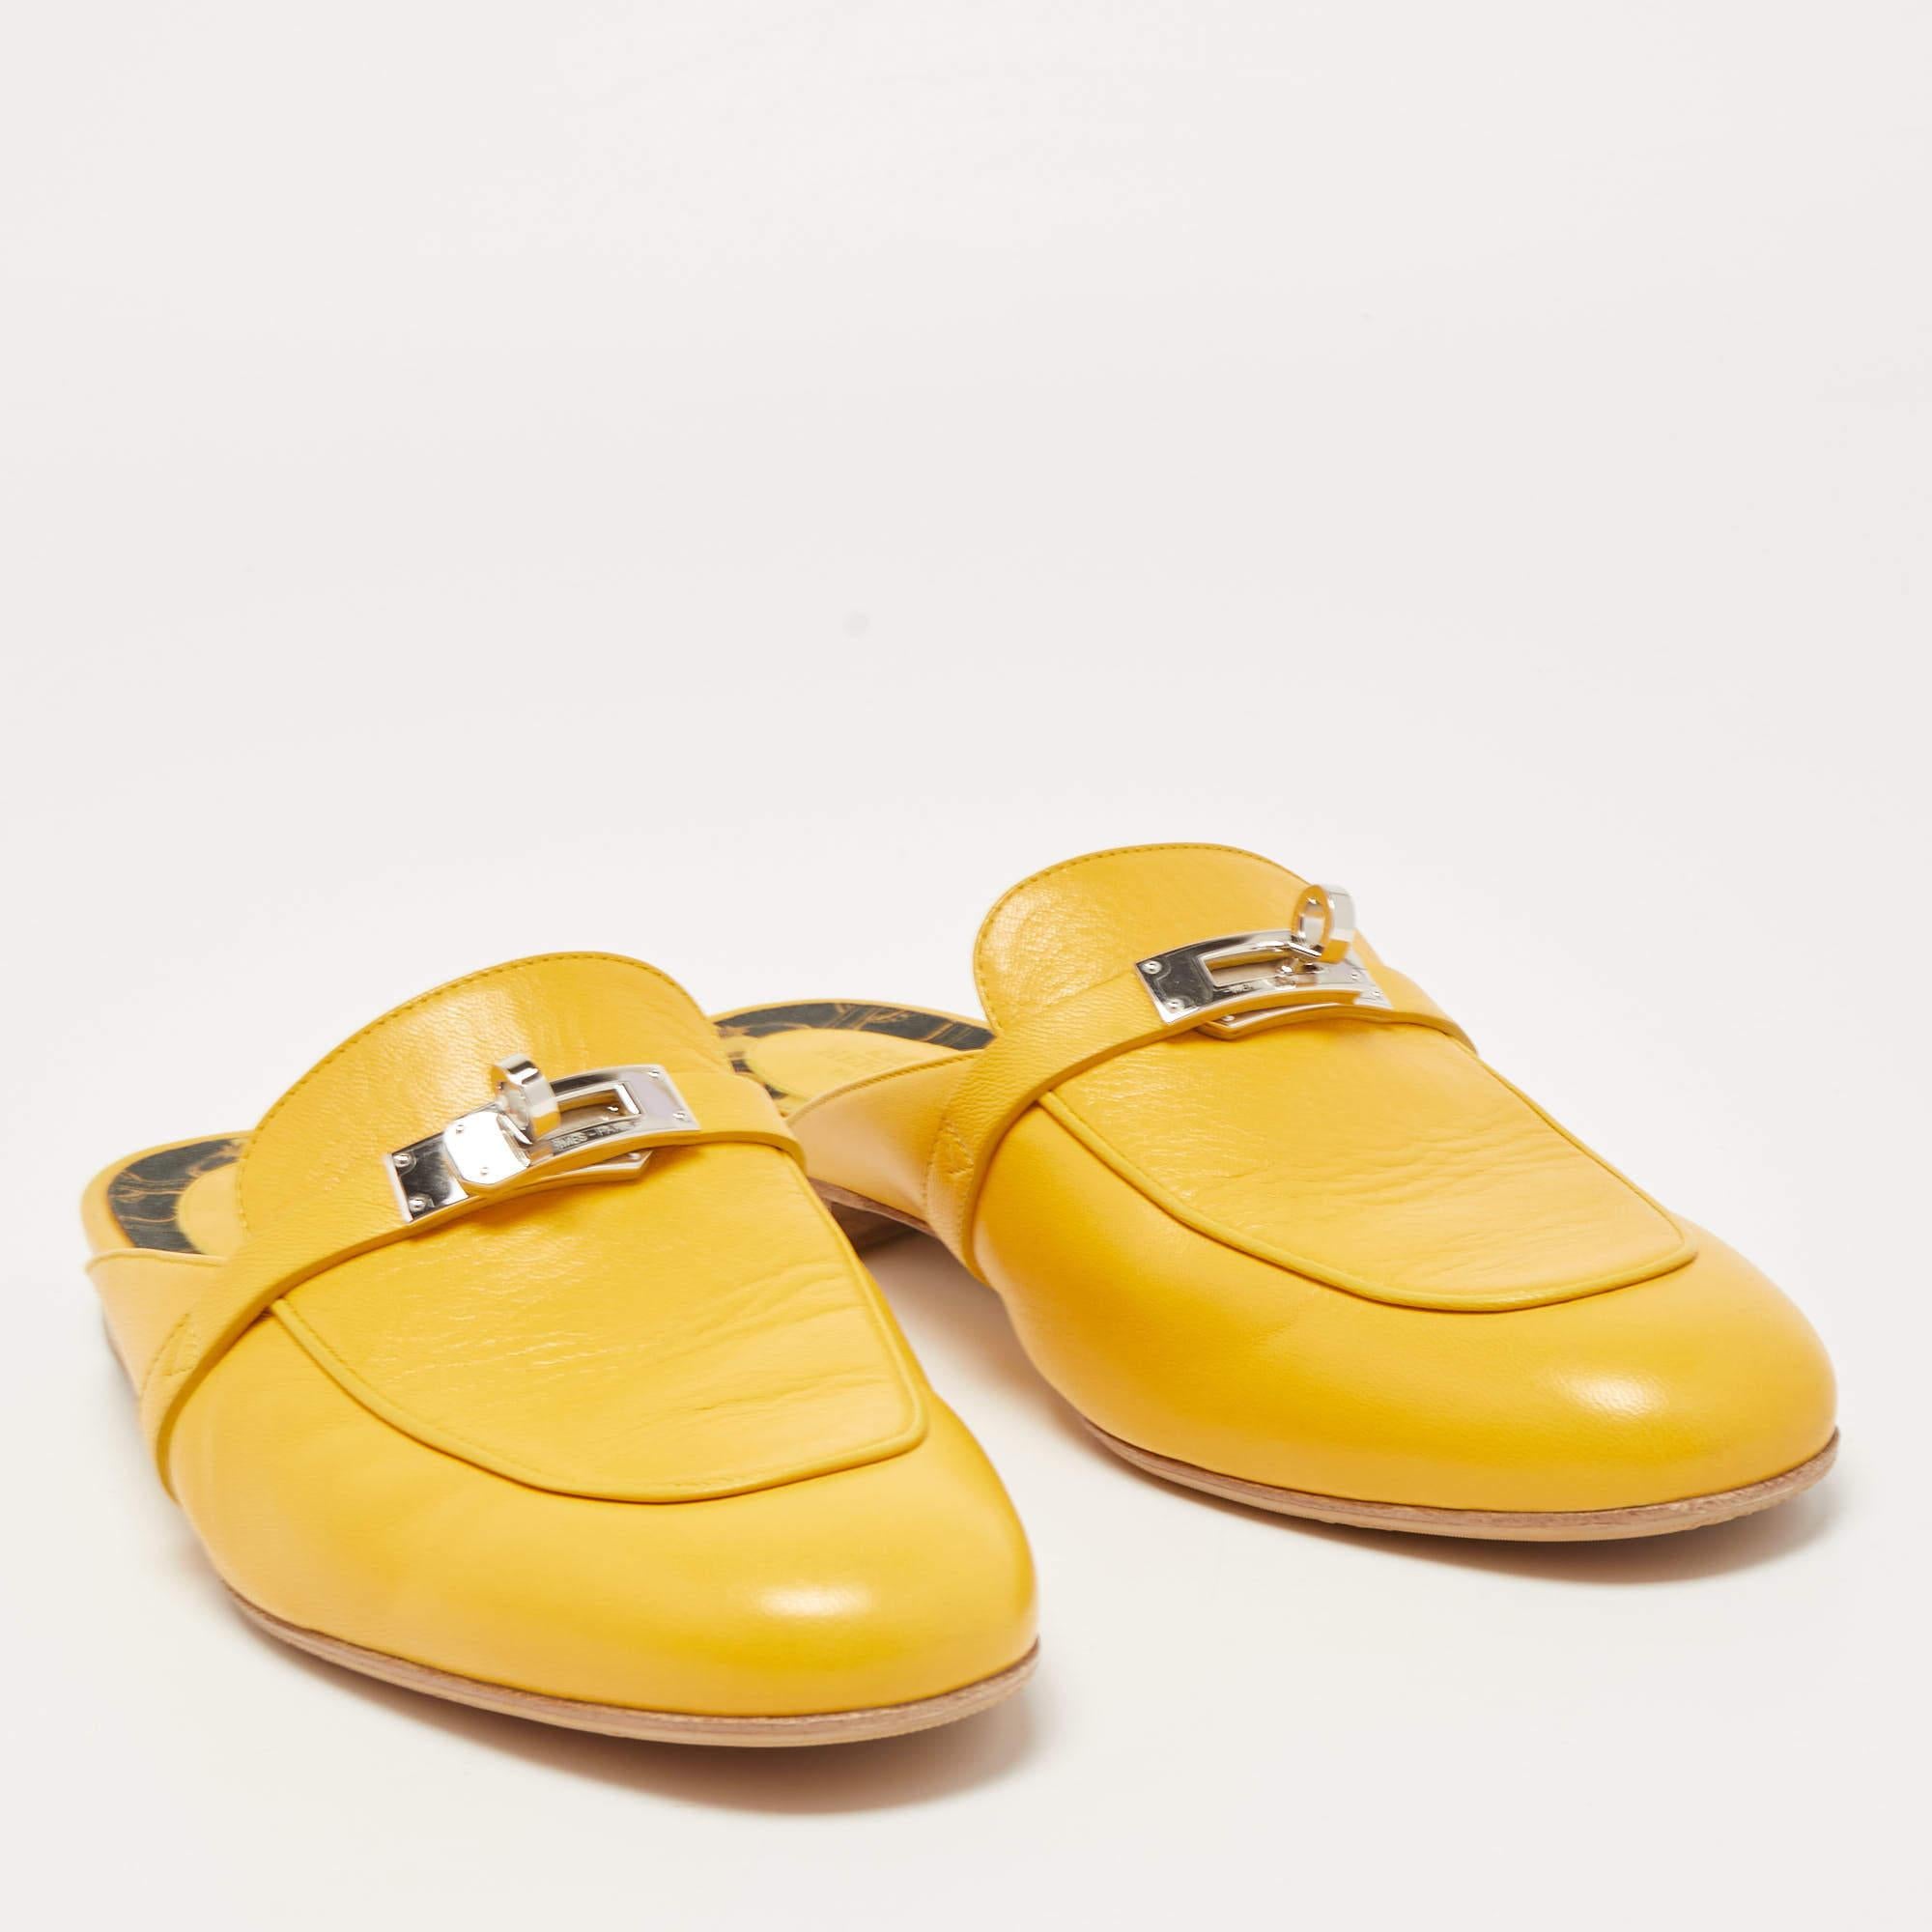 Hermes Yellow Leather Oz Flat Mules Size 41 1